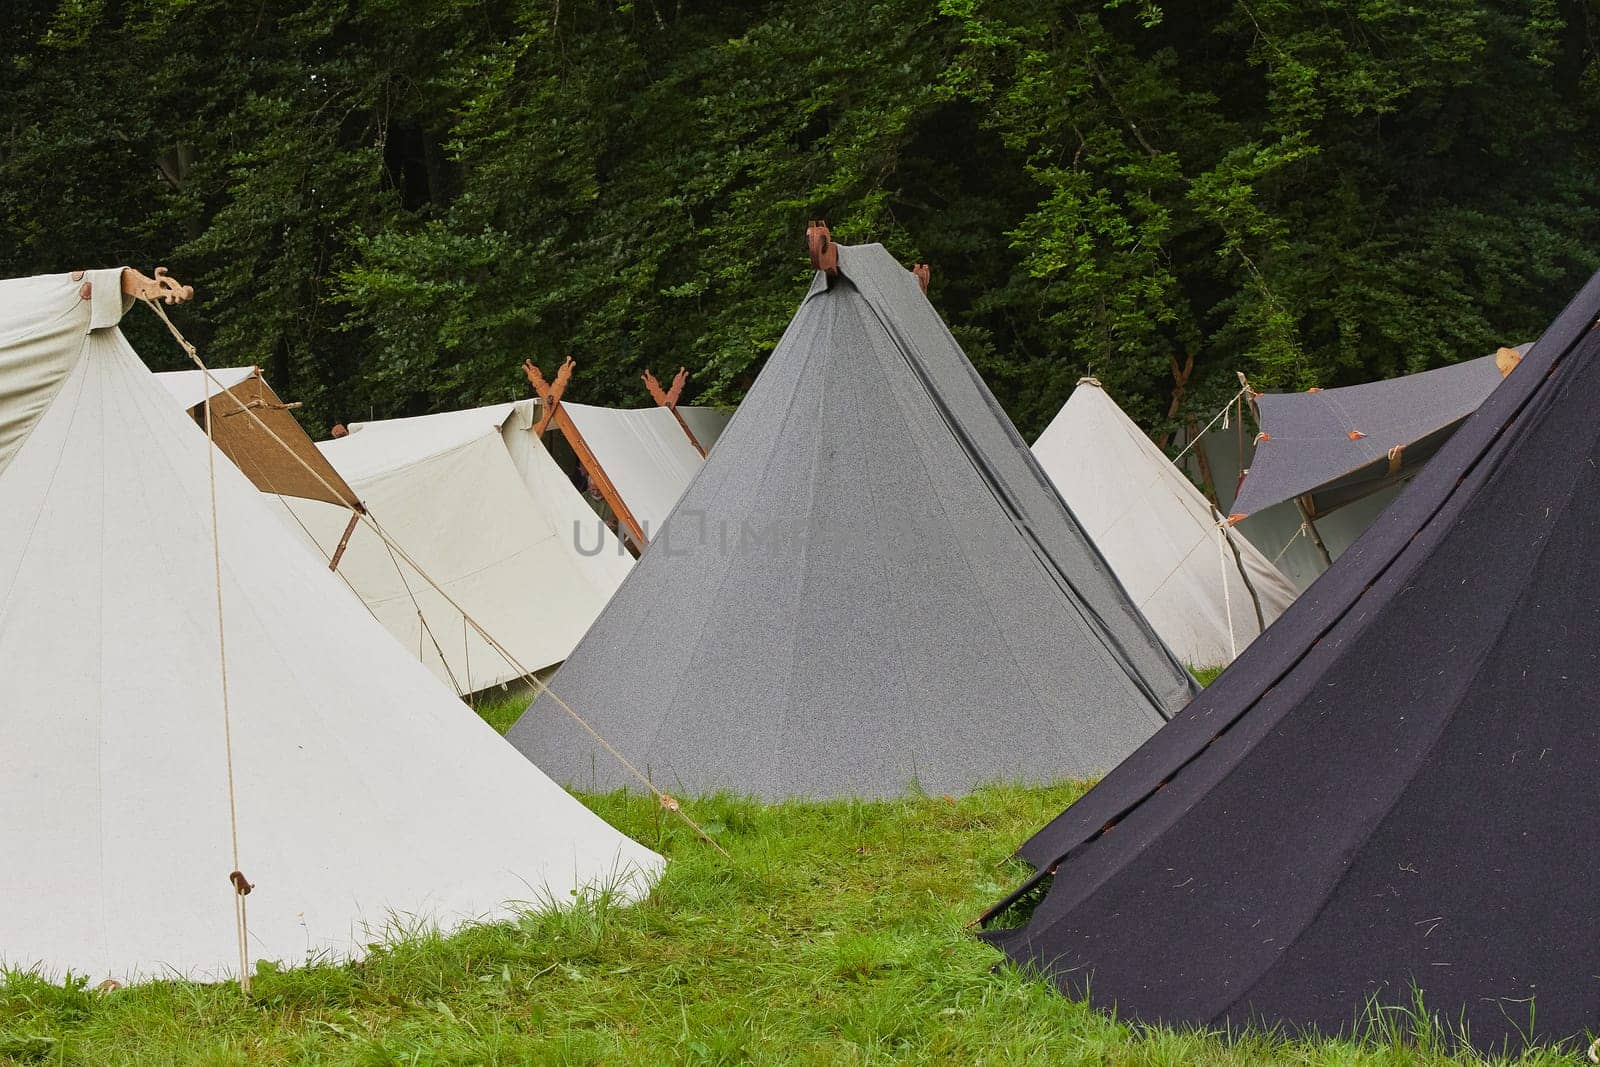 Vintage tents at the Viking Festival in Denmark.